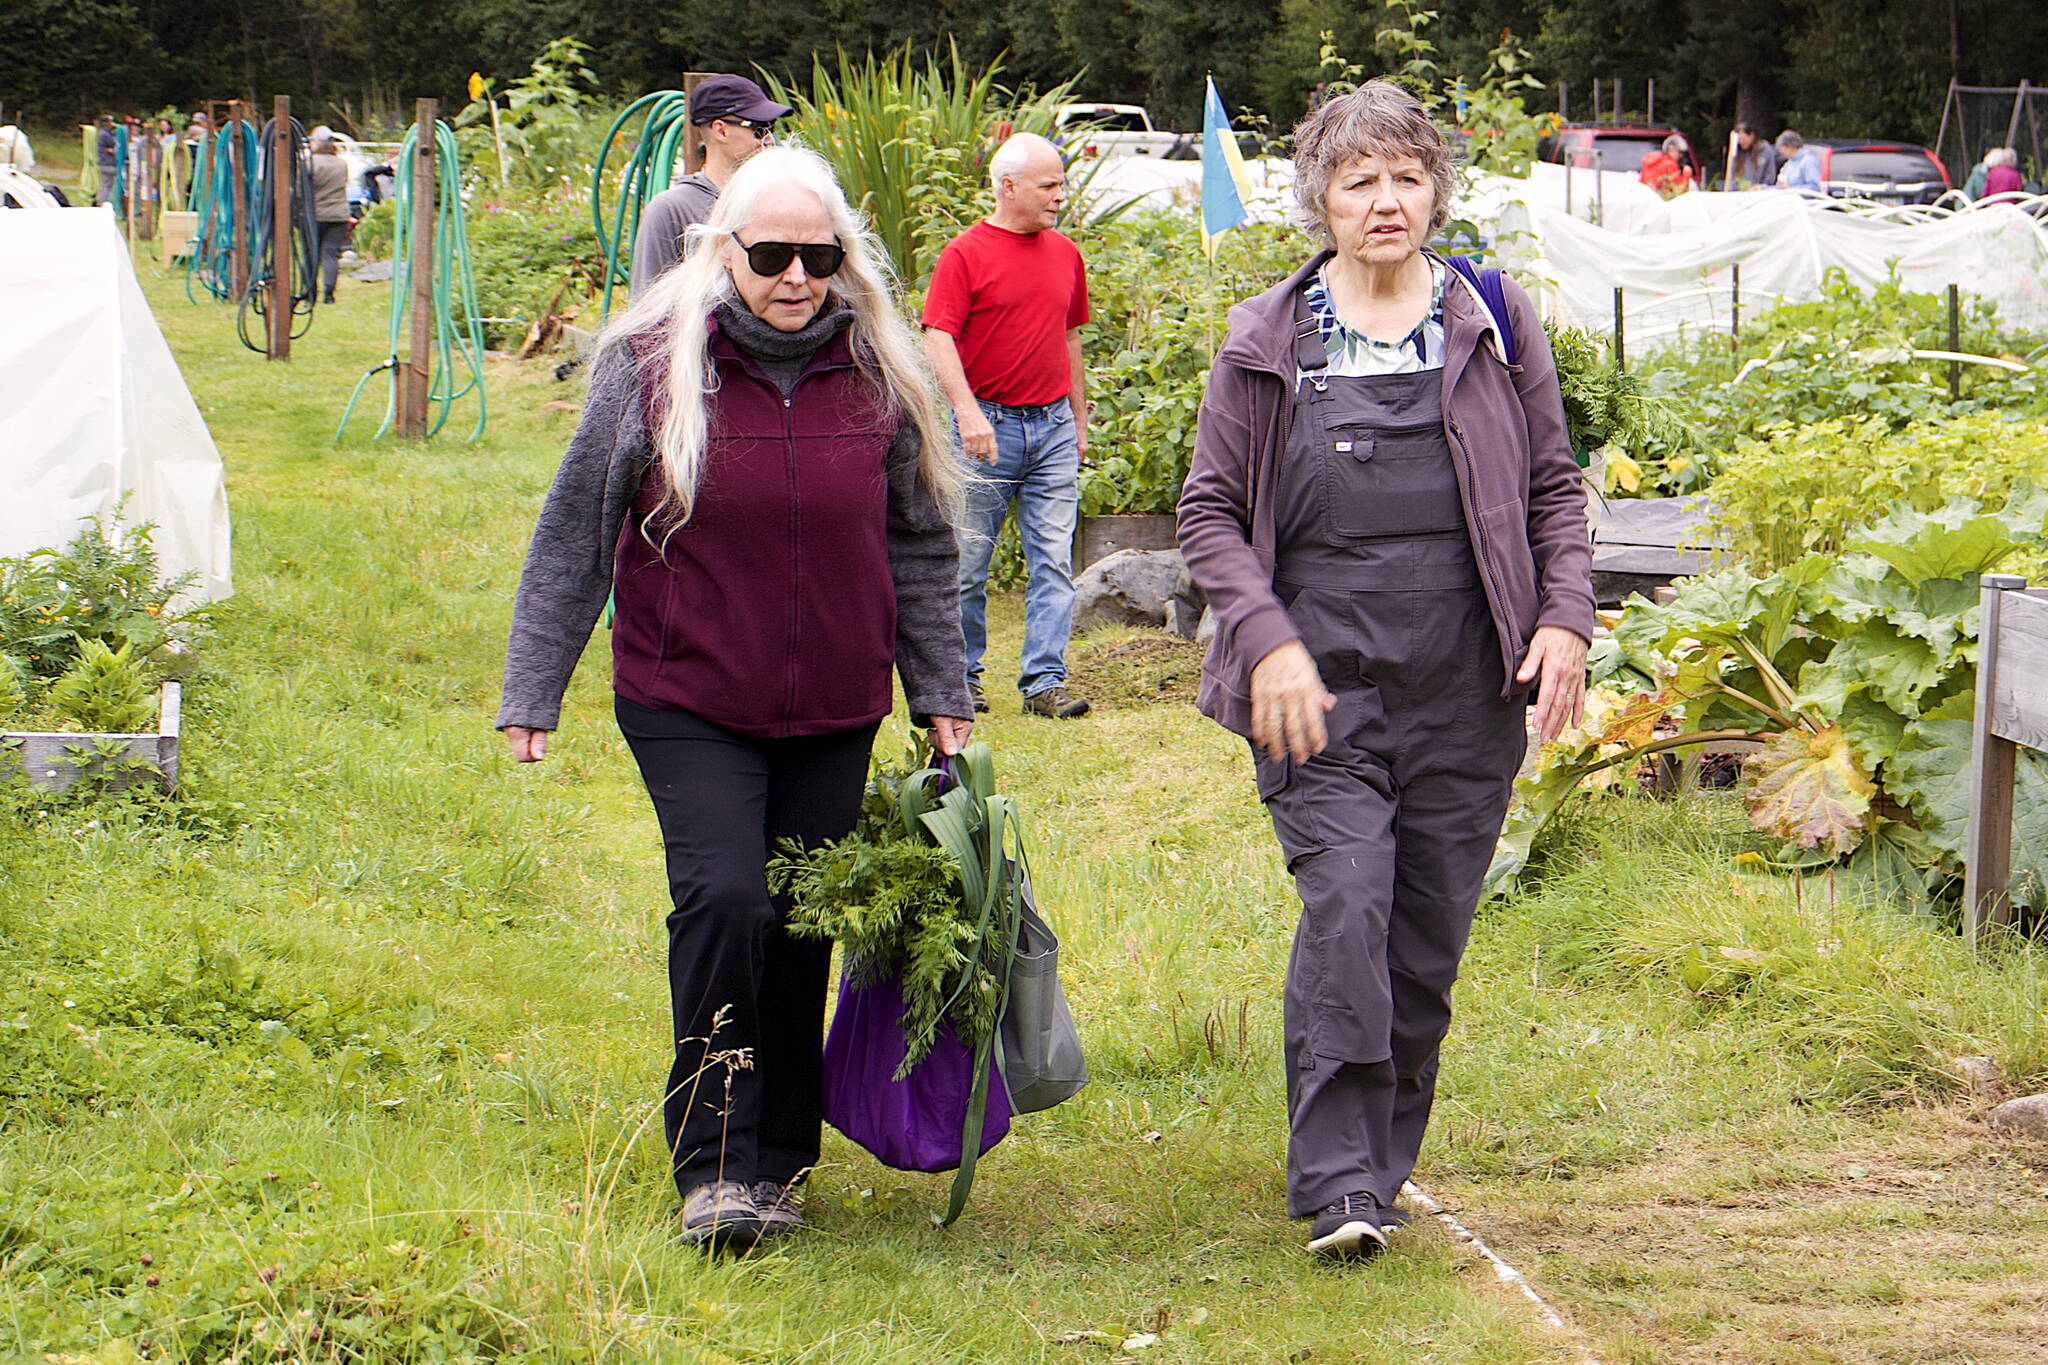 Pauline Plumb and Penny Saddler carry vegetables grown by fellow gardeners during the 29th Annual Juneau Community Garden Harvest Fair on Saturday. (Mark Sabbatini / Juneau Empire)